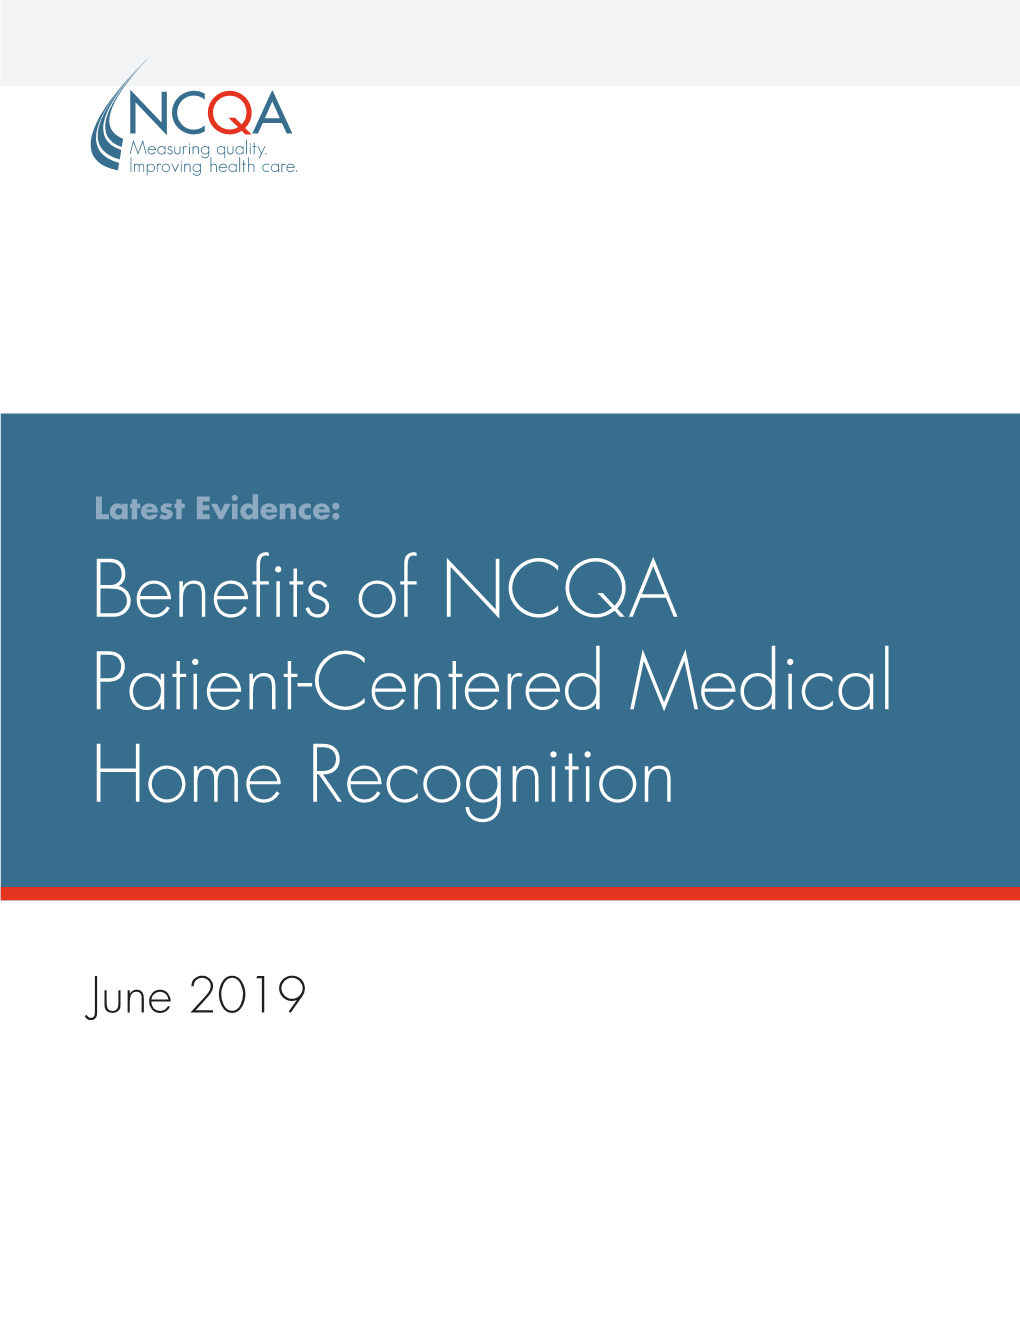 Benefits of NCQA Patient-Centered Medical Home Recognition